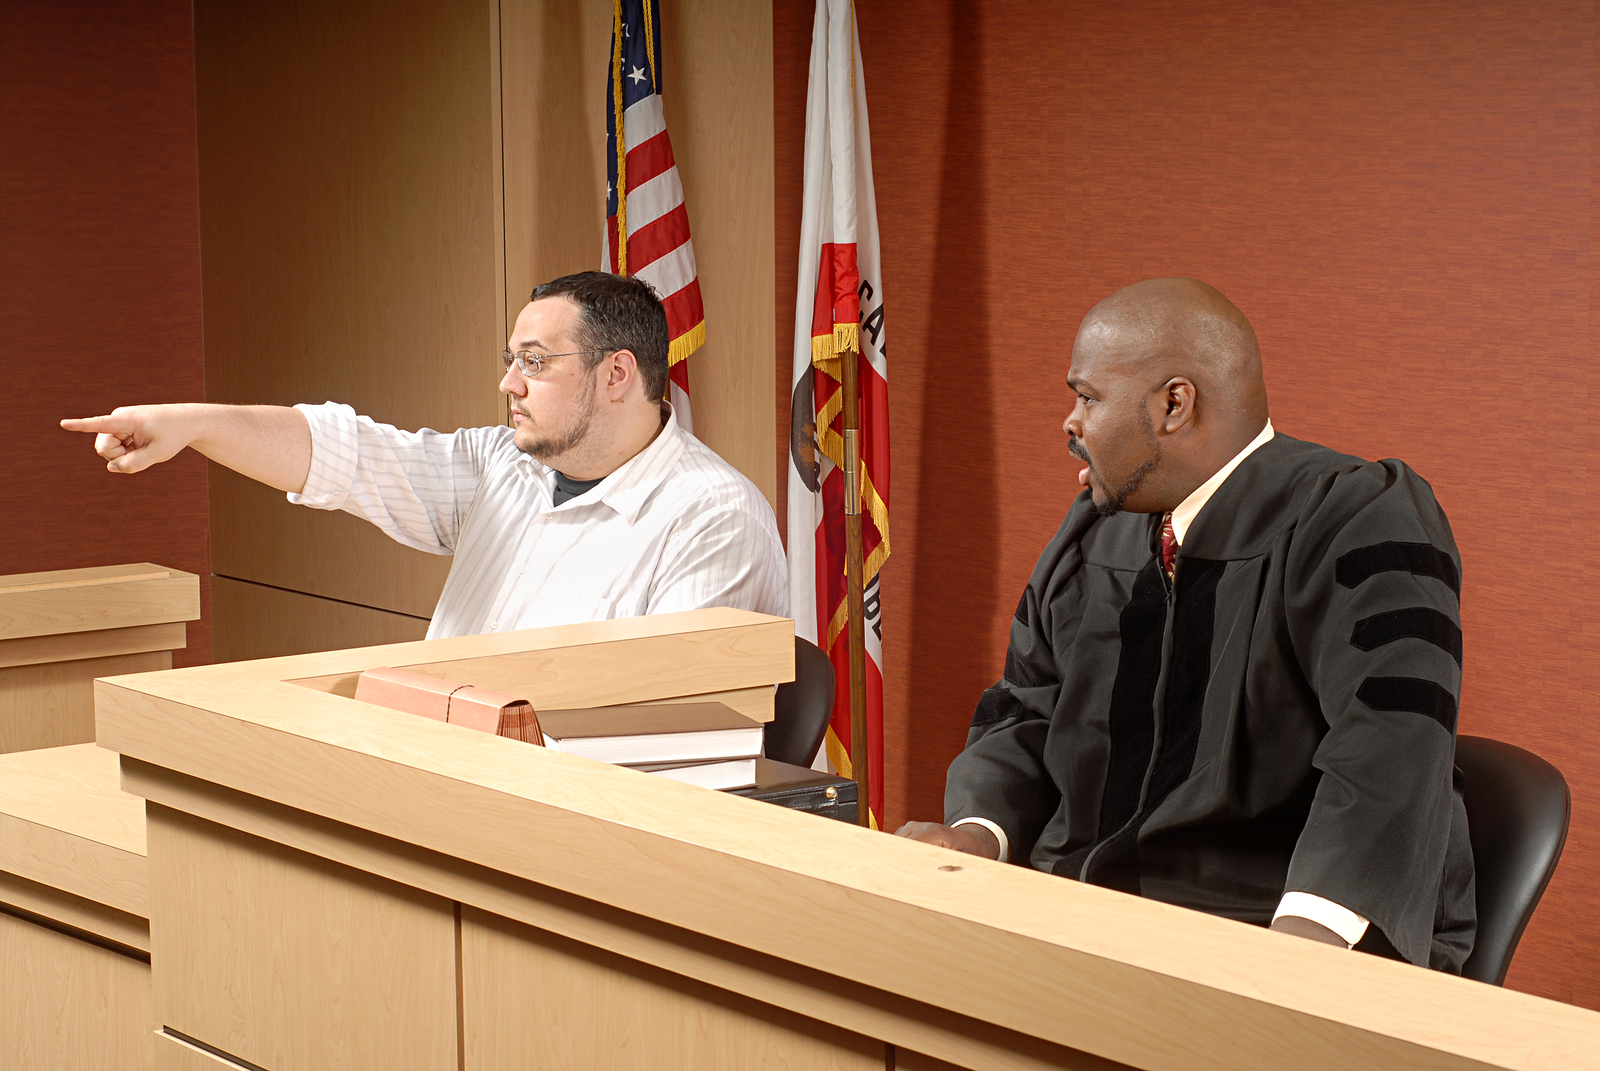 Witness at trial